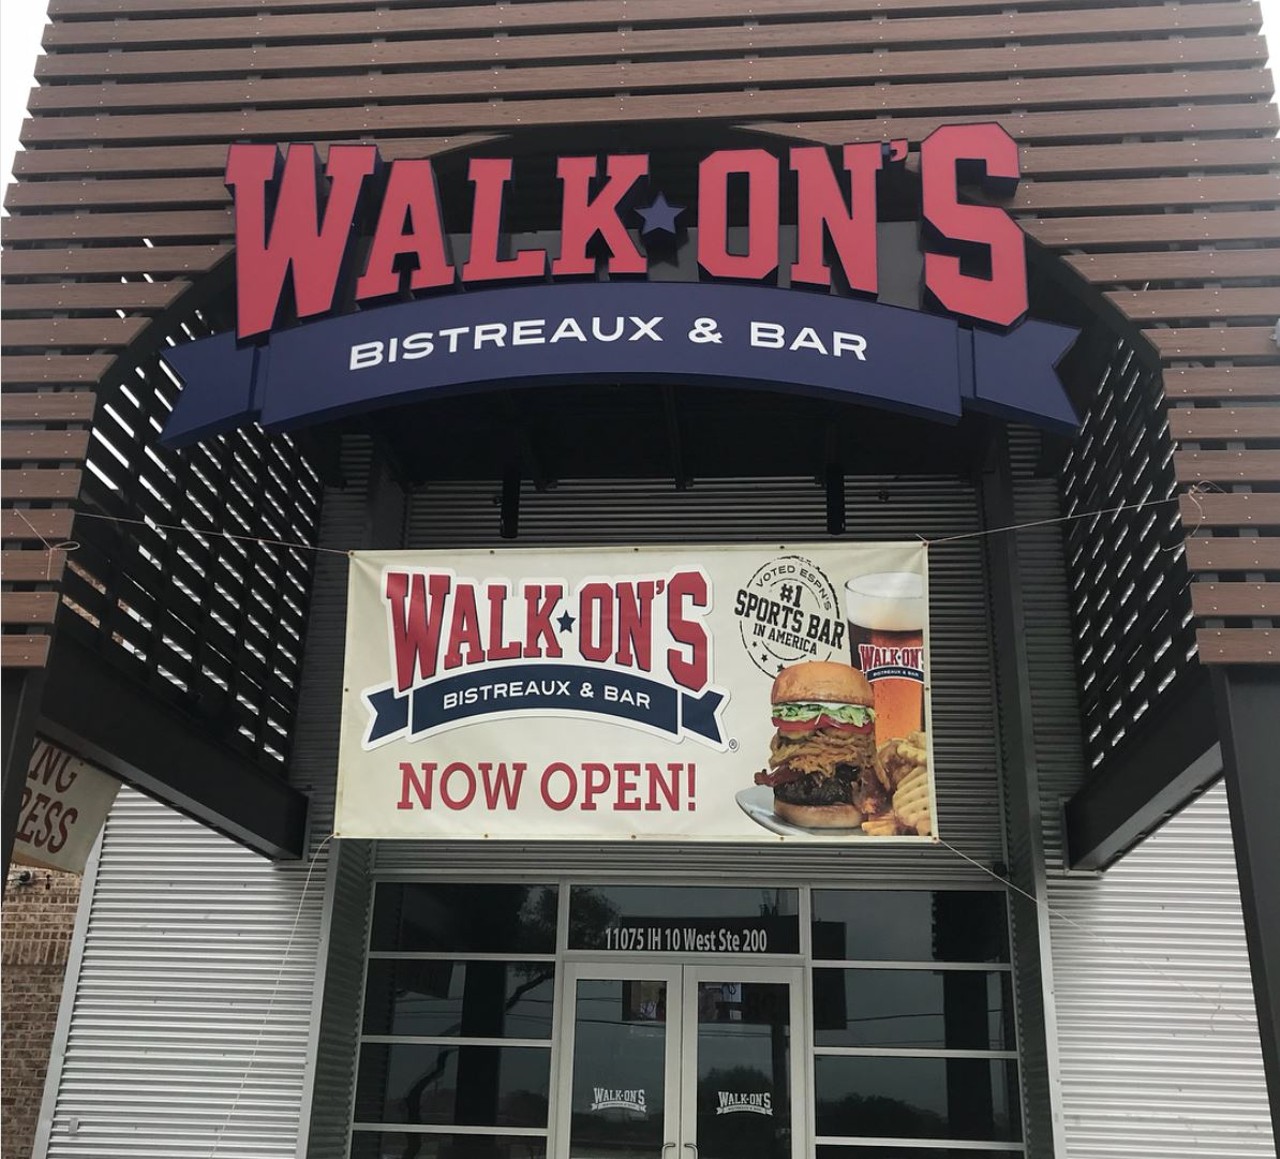 Walk-On’s Bistreaux & Bar
11075 IH 10 W, (210) 455-6644, walk-ons.com
Walk-On’s Bistreaux & Bar opened its second location in San Antonio with boozy drinks and Louisiana-style food. The location makes 19 for the Drew Brees’-backed bar and grill.
Photo via Instagram / walkons